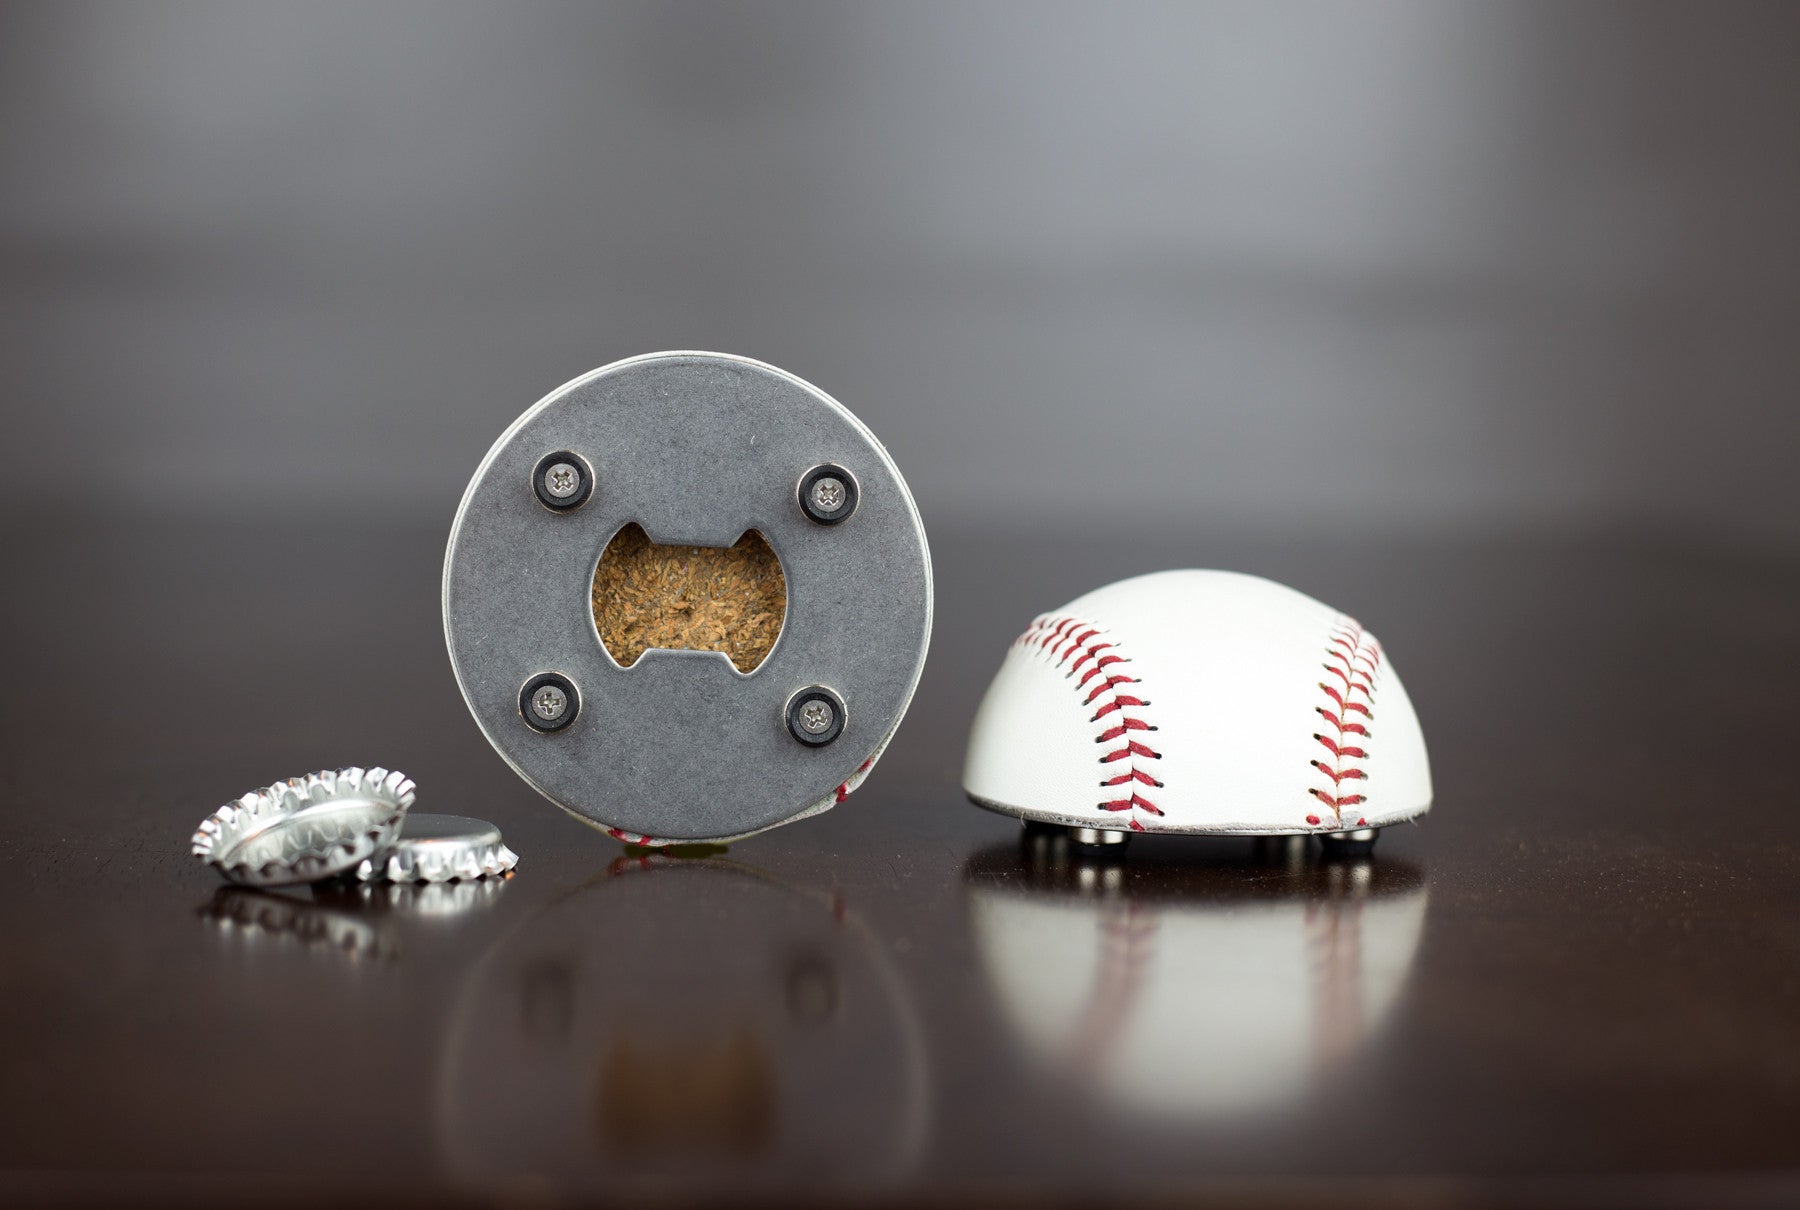 All About That Base, Baseball Bottle Opener